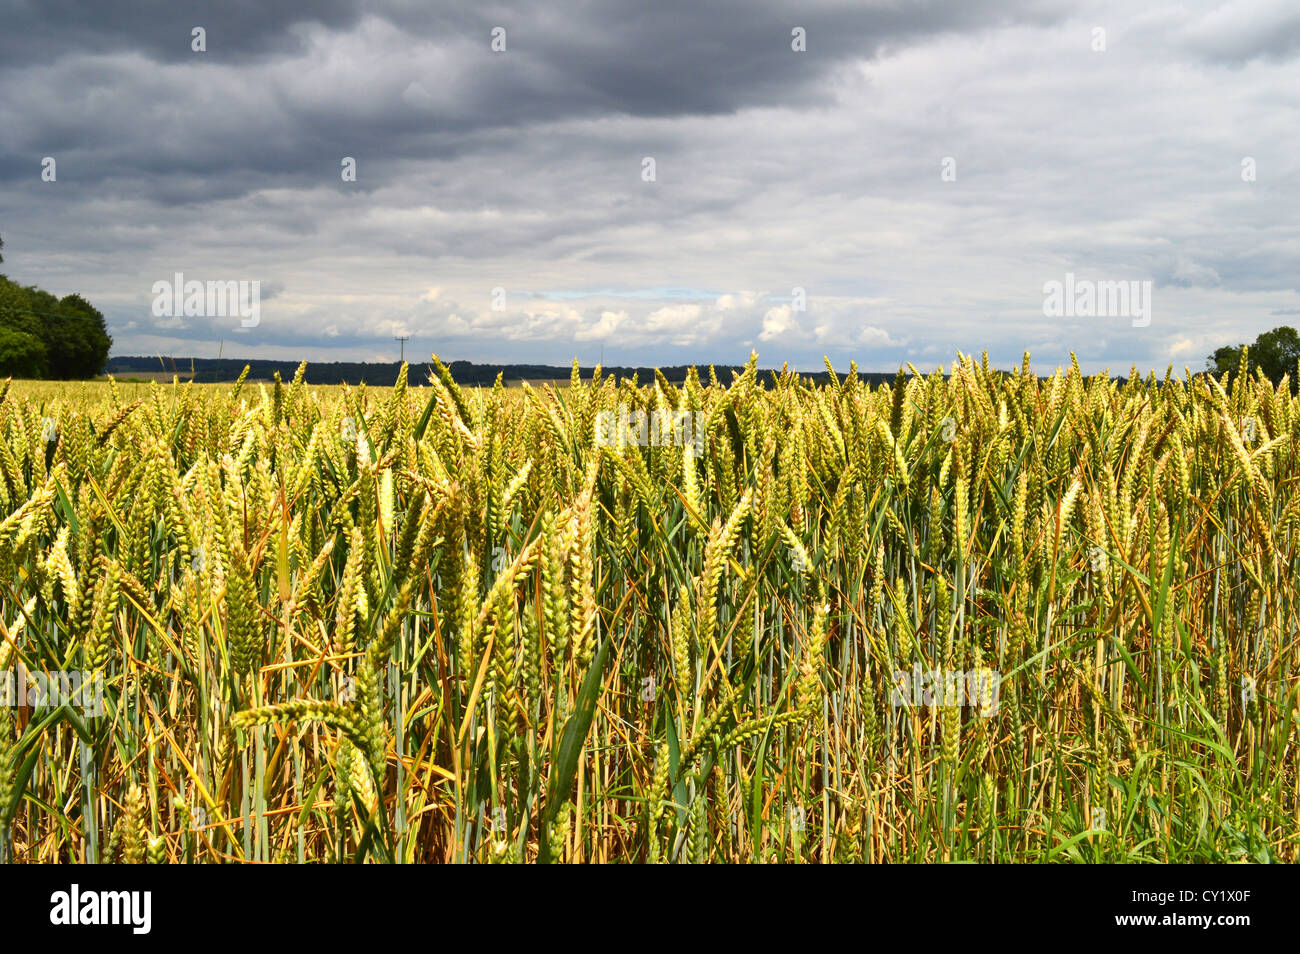 Corn Field nature, agricultural farming Stock Photo